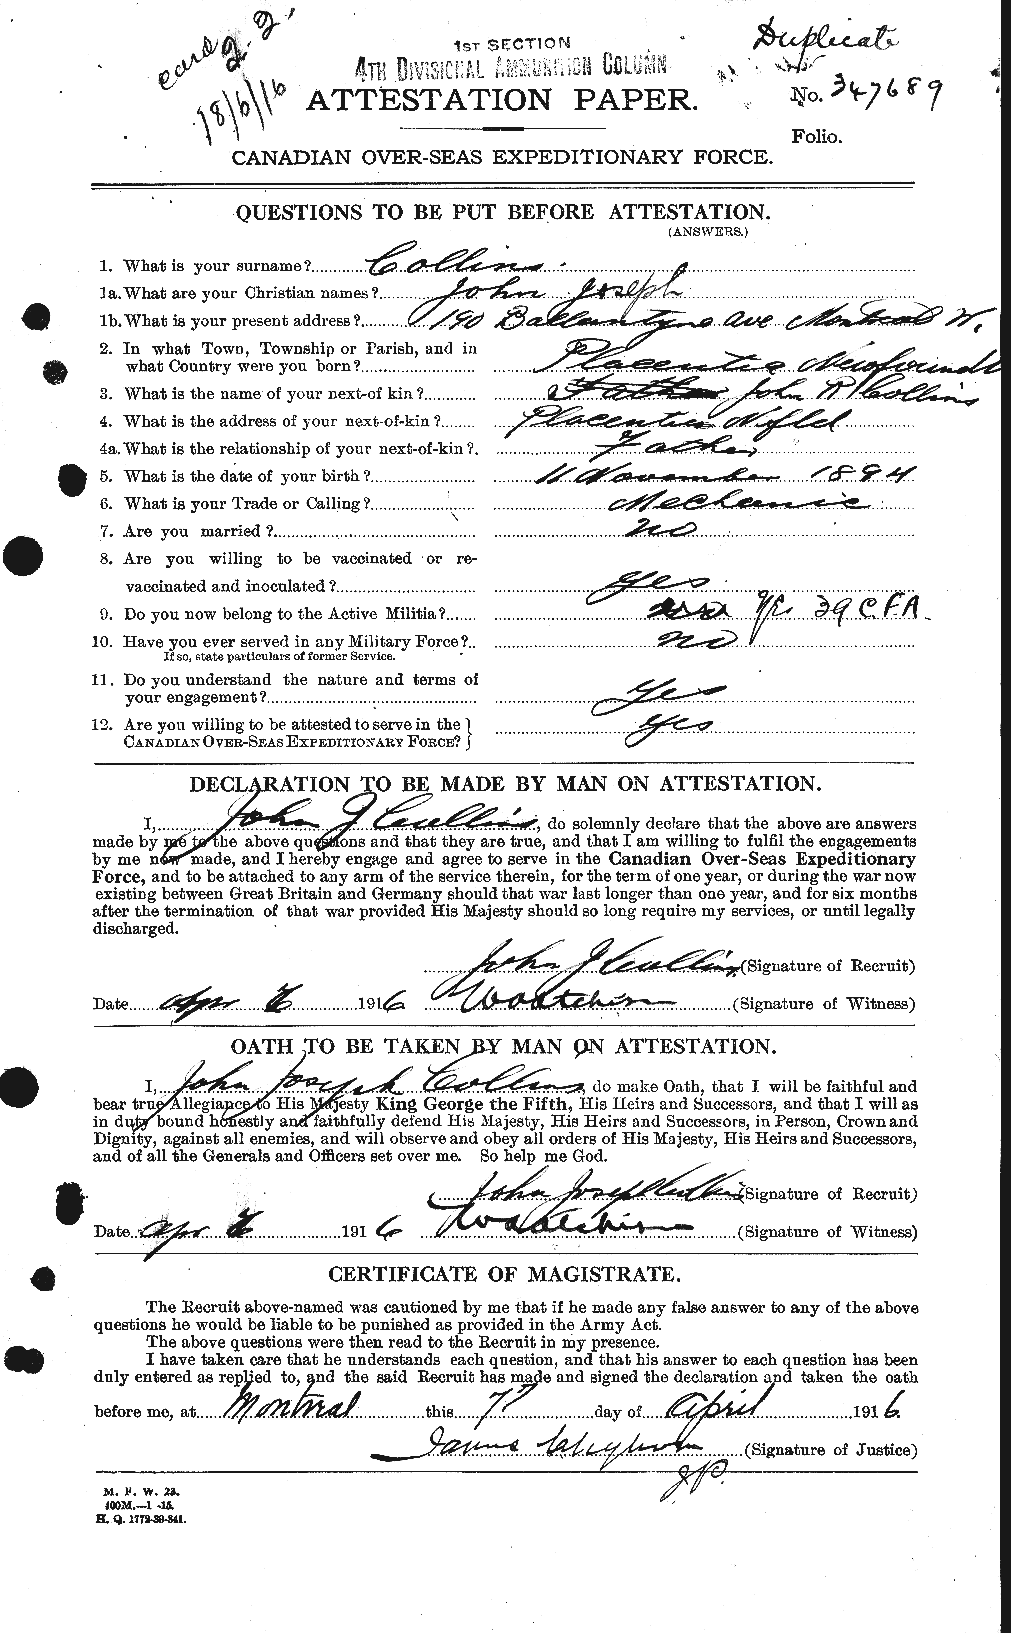 Personnel Records of the First World War - CEF 069550a